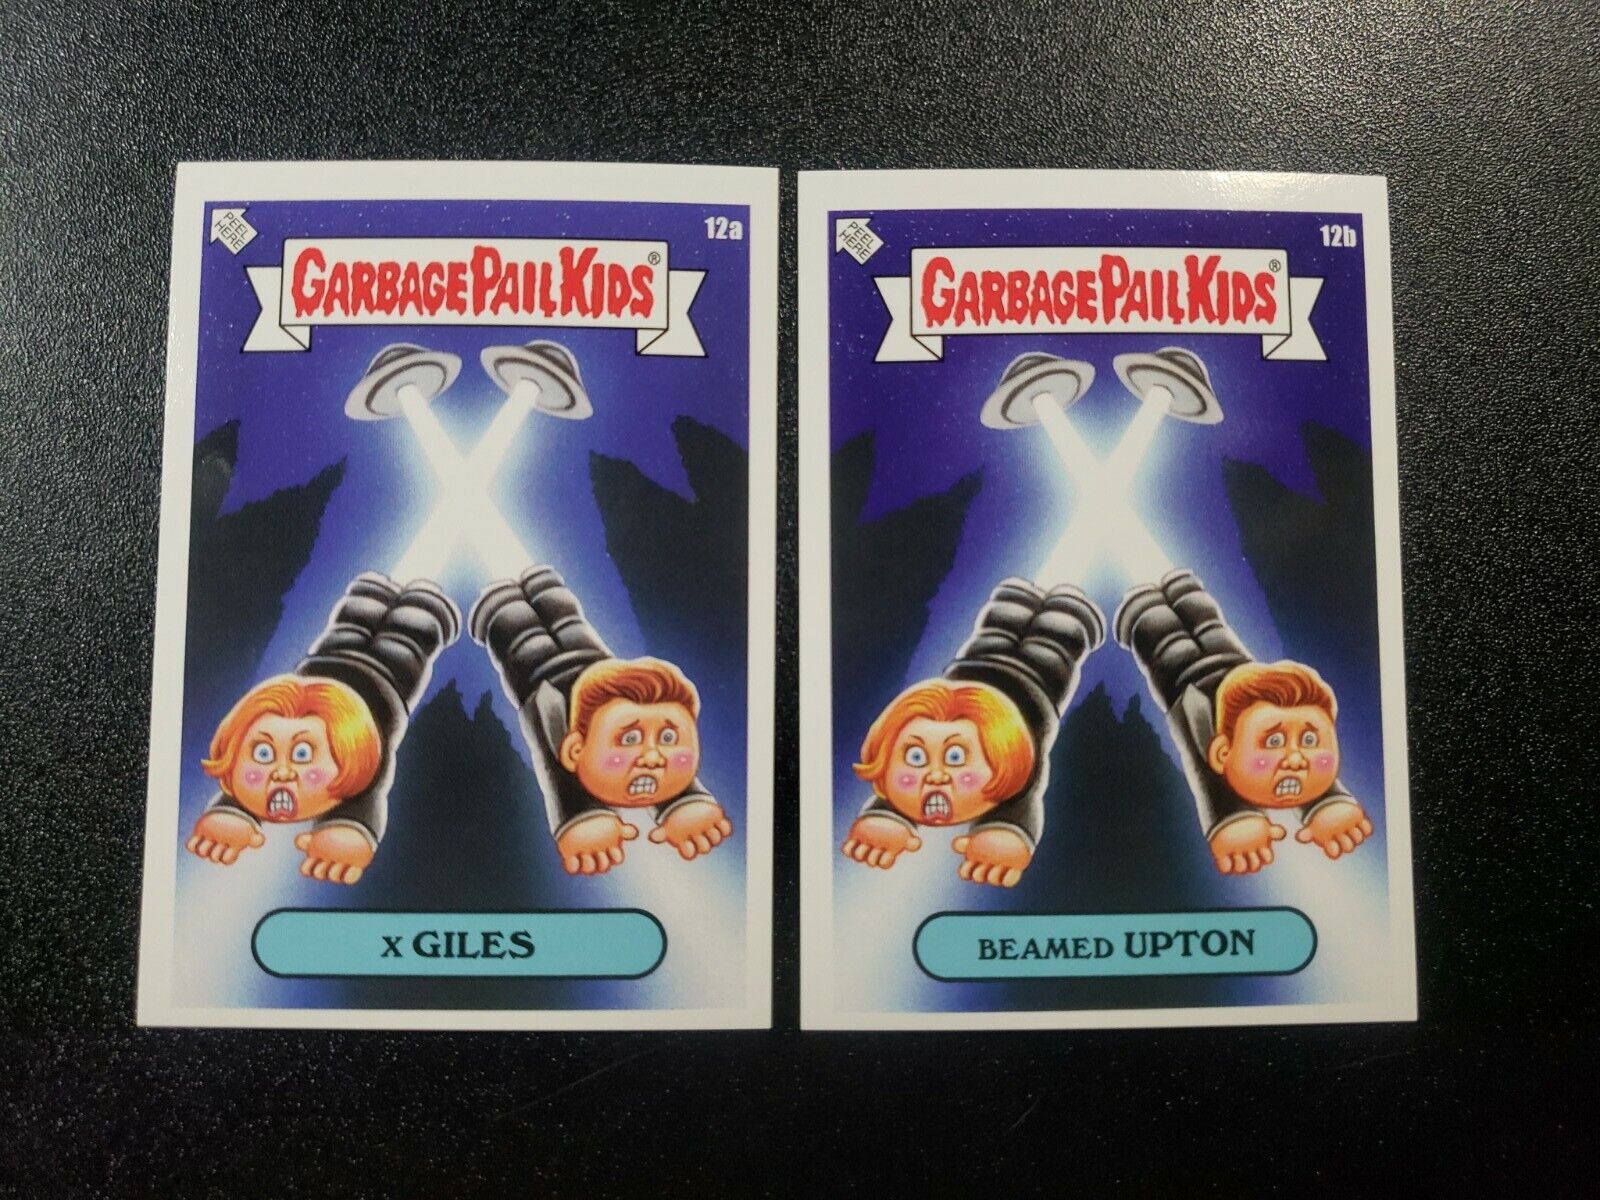 X Files David Duchovny Gillian Anderson Spoof Garbage Pail Kids 2 Card Set